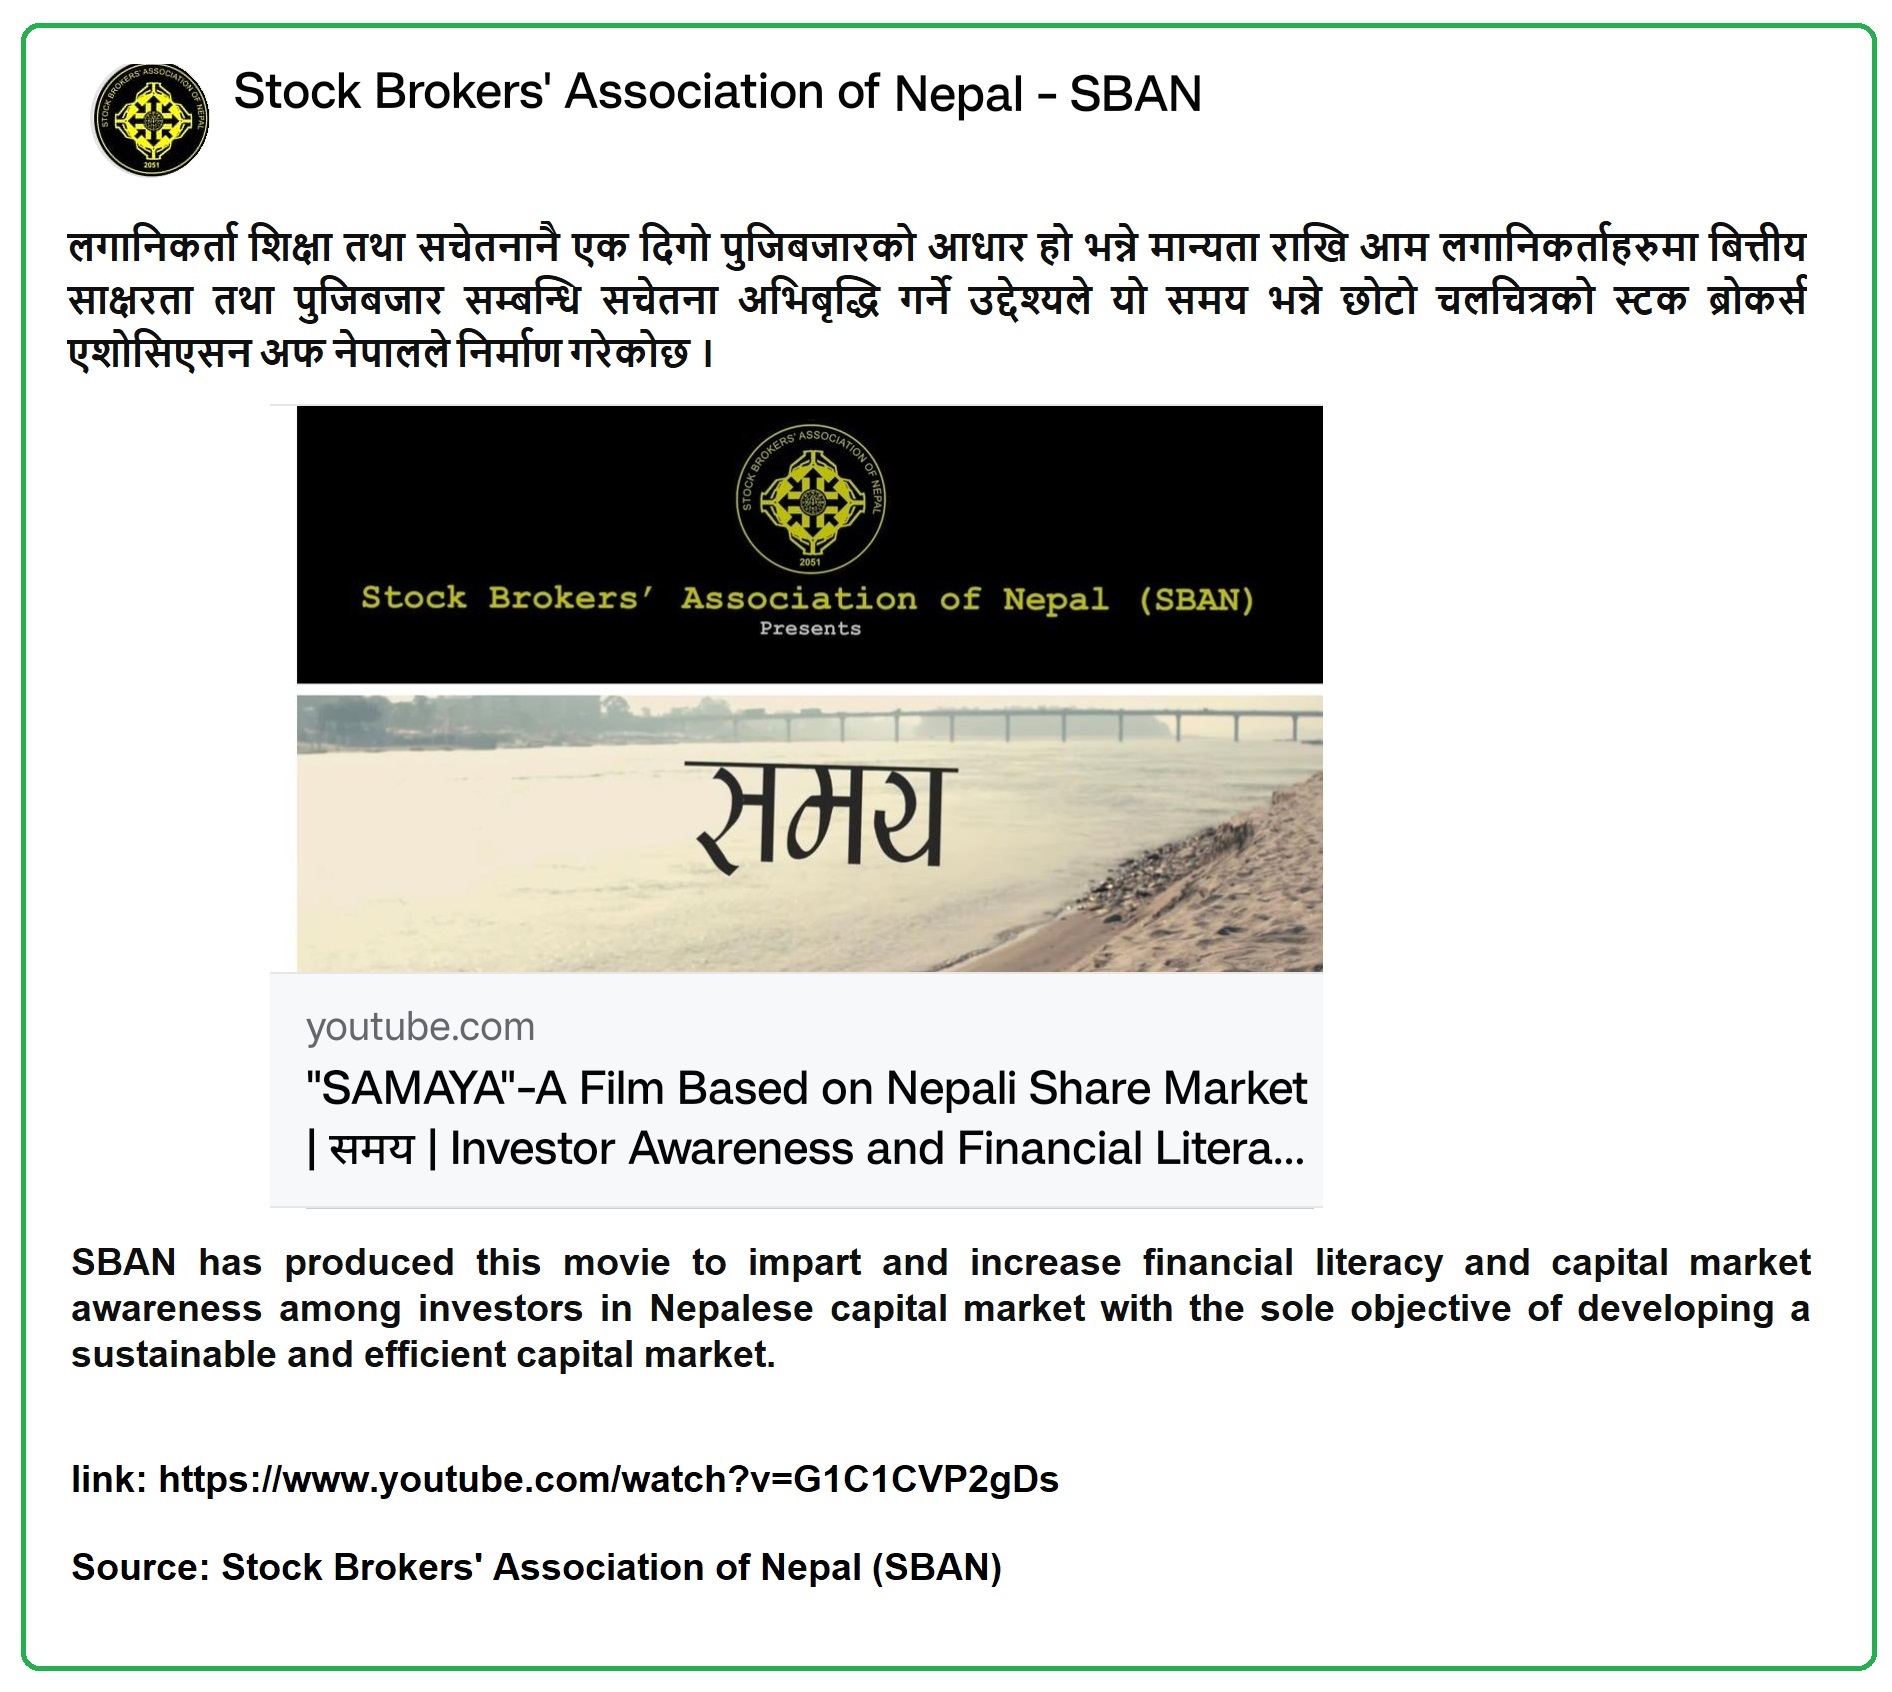 SBAN has produced this movie to impart and increase financial literacy and capital market awareness among investors in Nepalese capital market with the sole objective of developing a sustainable and efficient capital market.